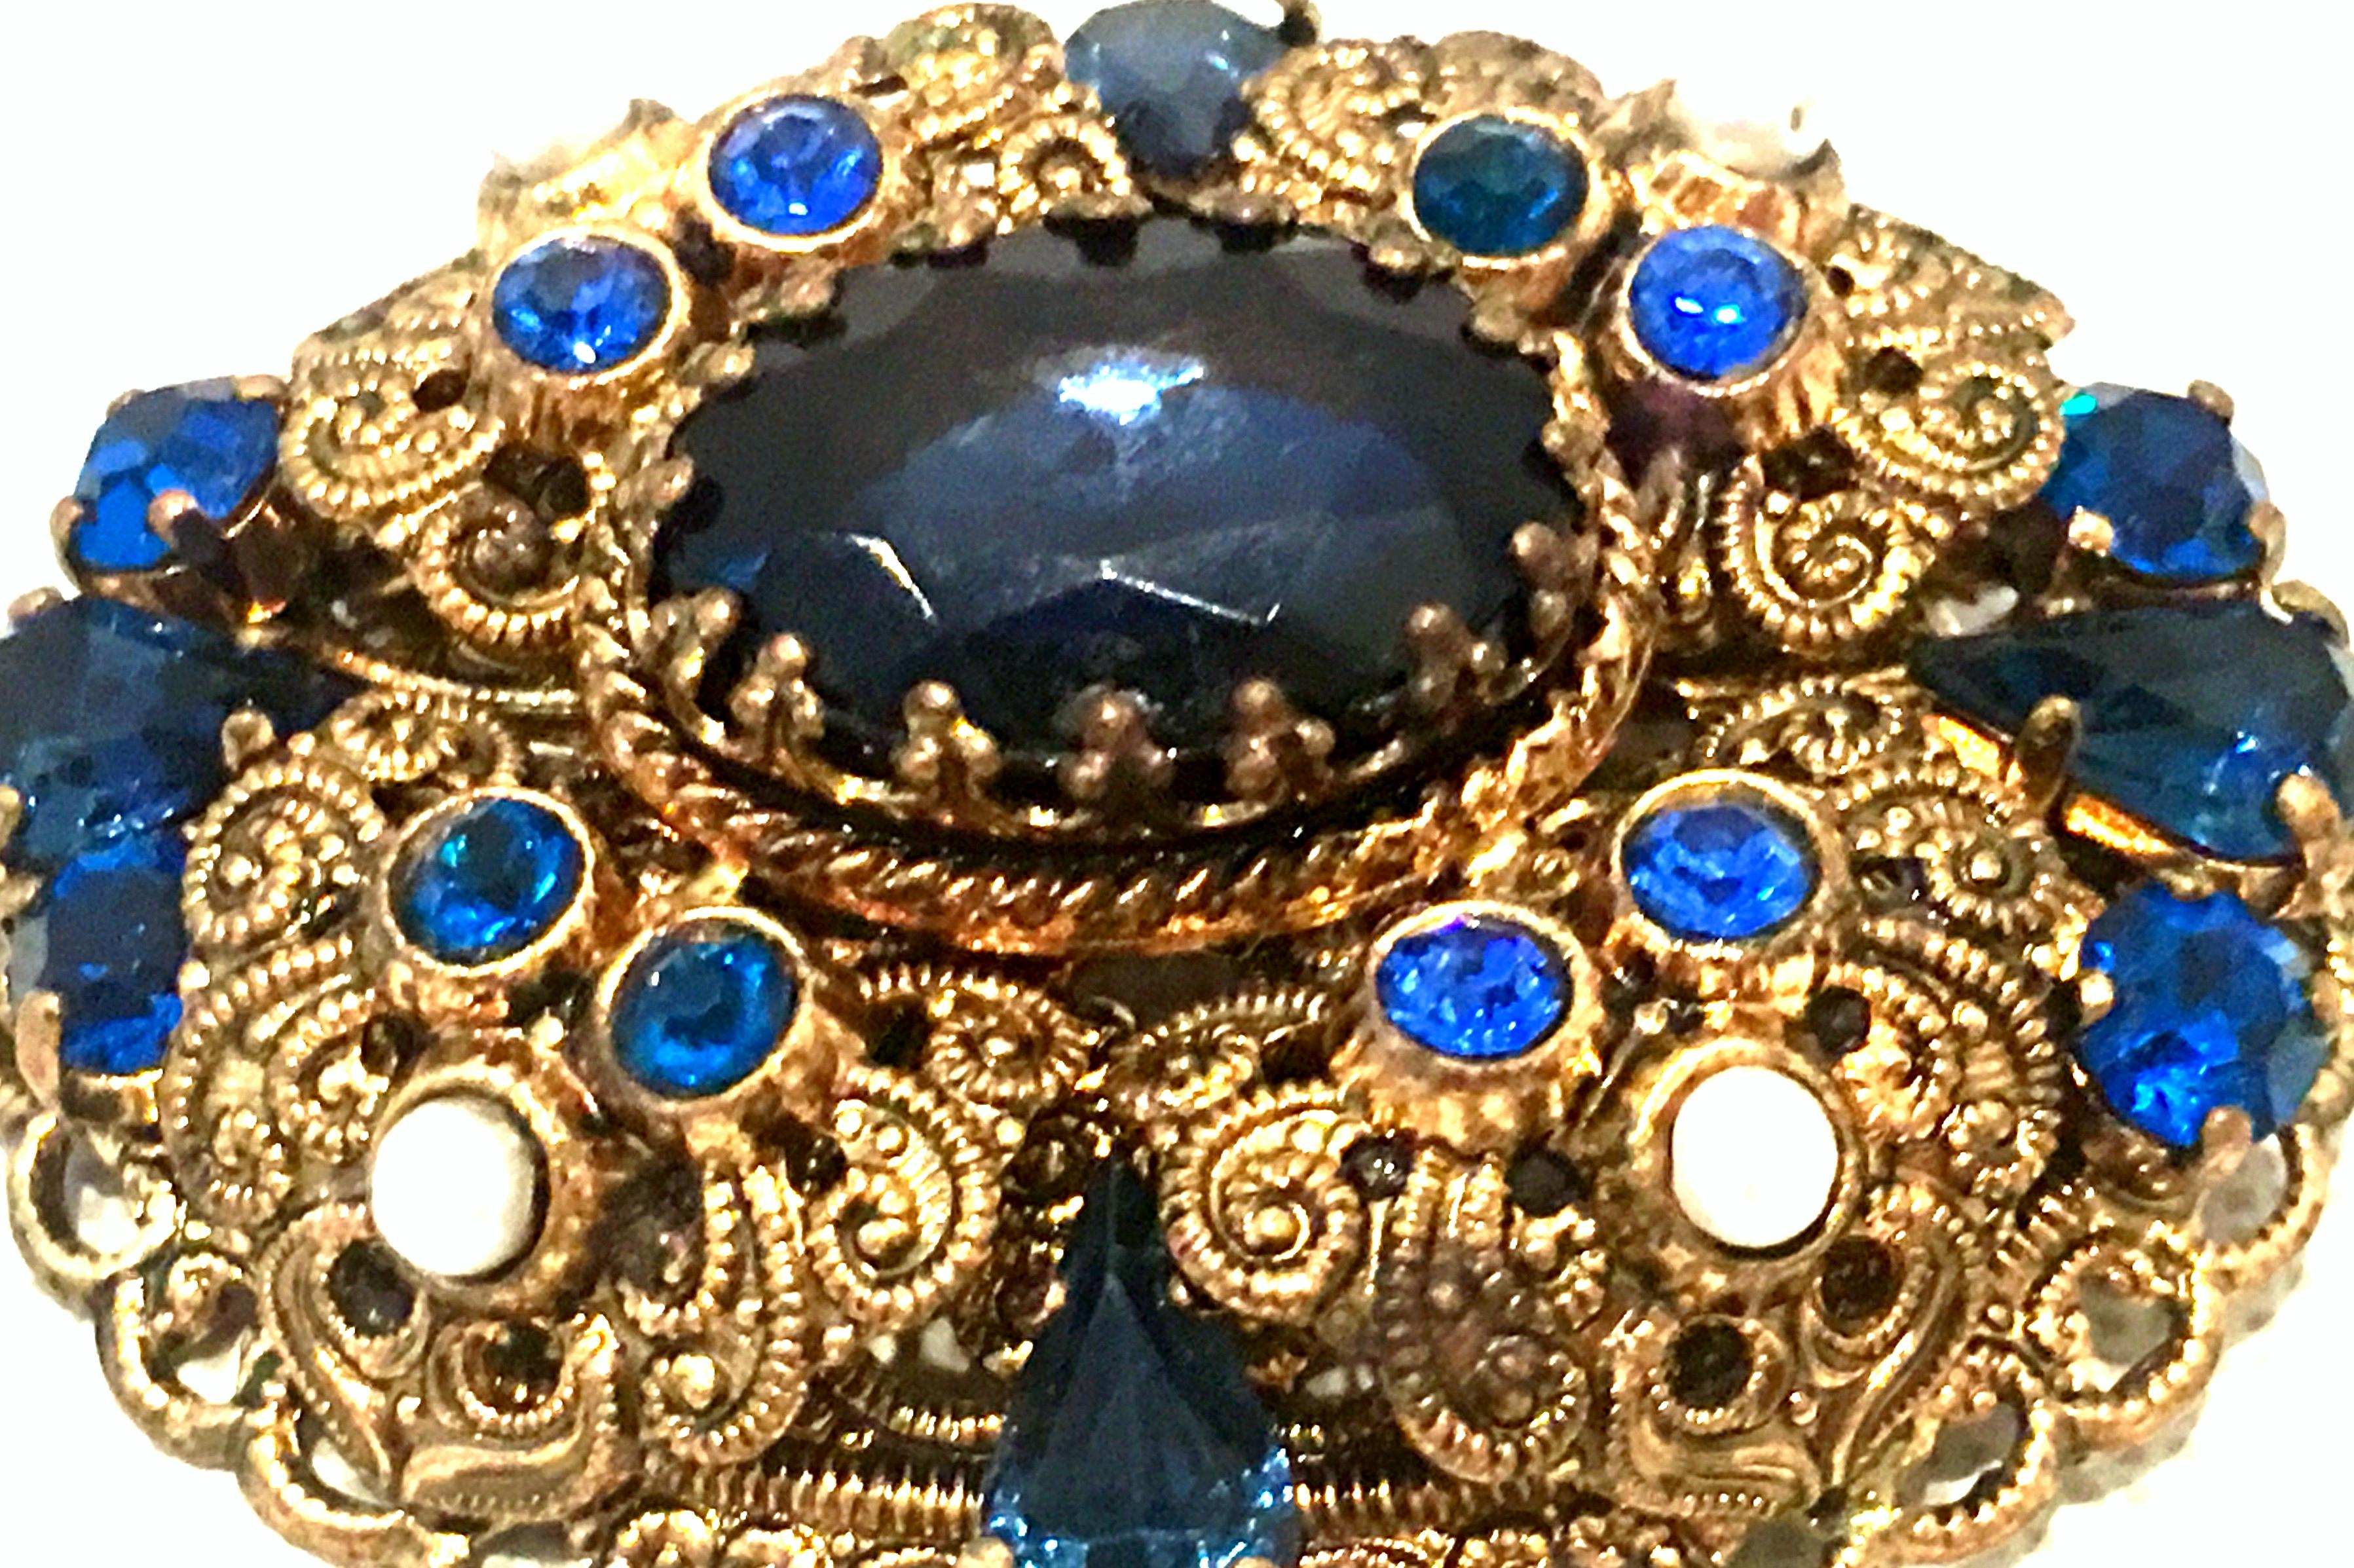 Mid-20th Century Gold Vermeil & Austrian Crystal Brooch-Signed, West Germany.
This oval gold vermeil  dimensional brooch features delicate and intricate filigree work with brilliant cut and faceted Austrian crystal sapphire blue stones and white